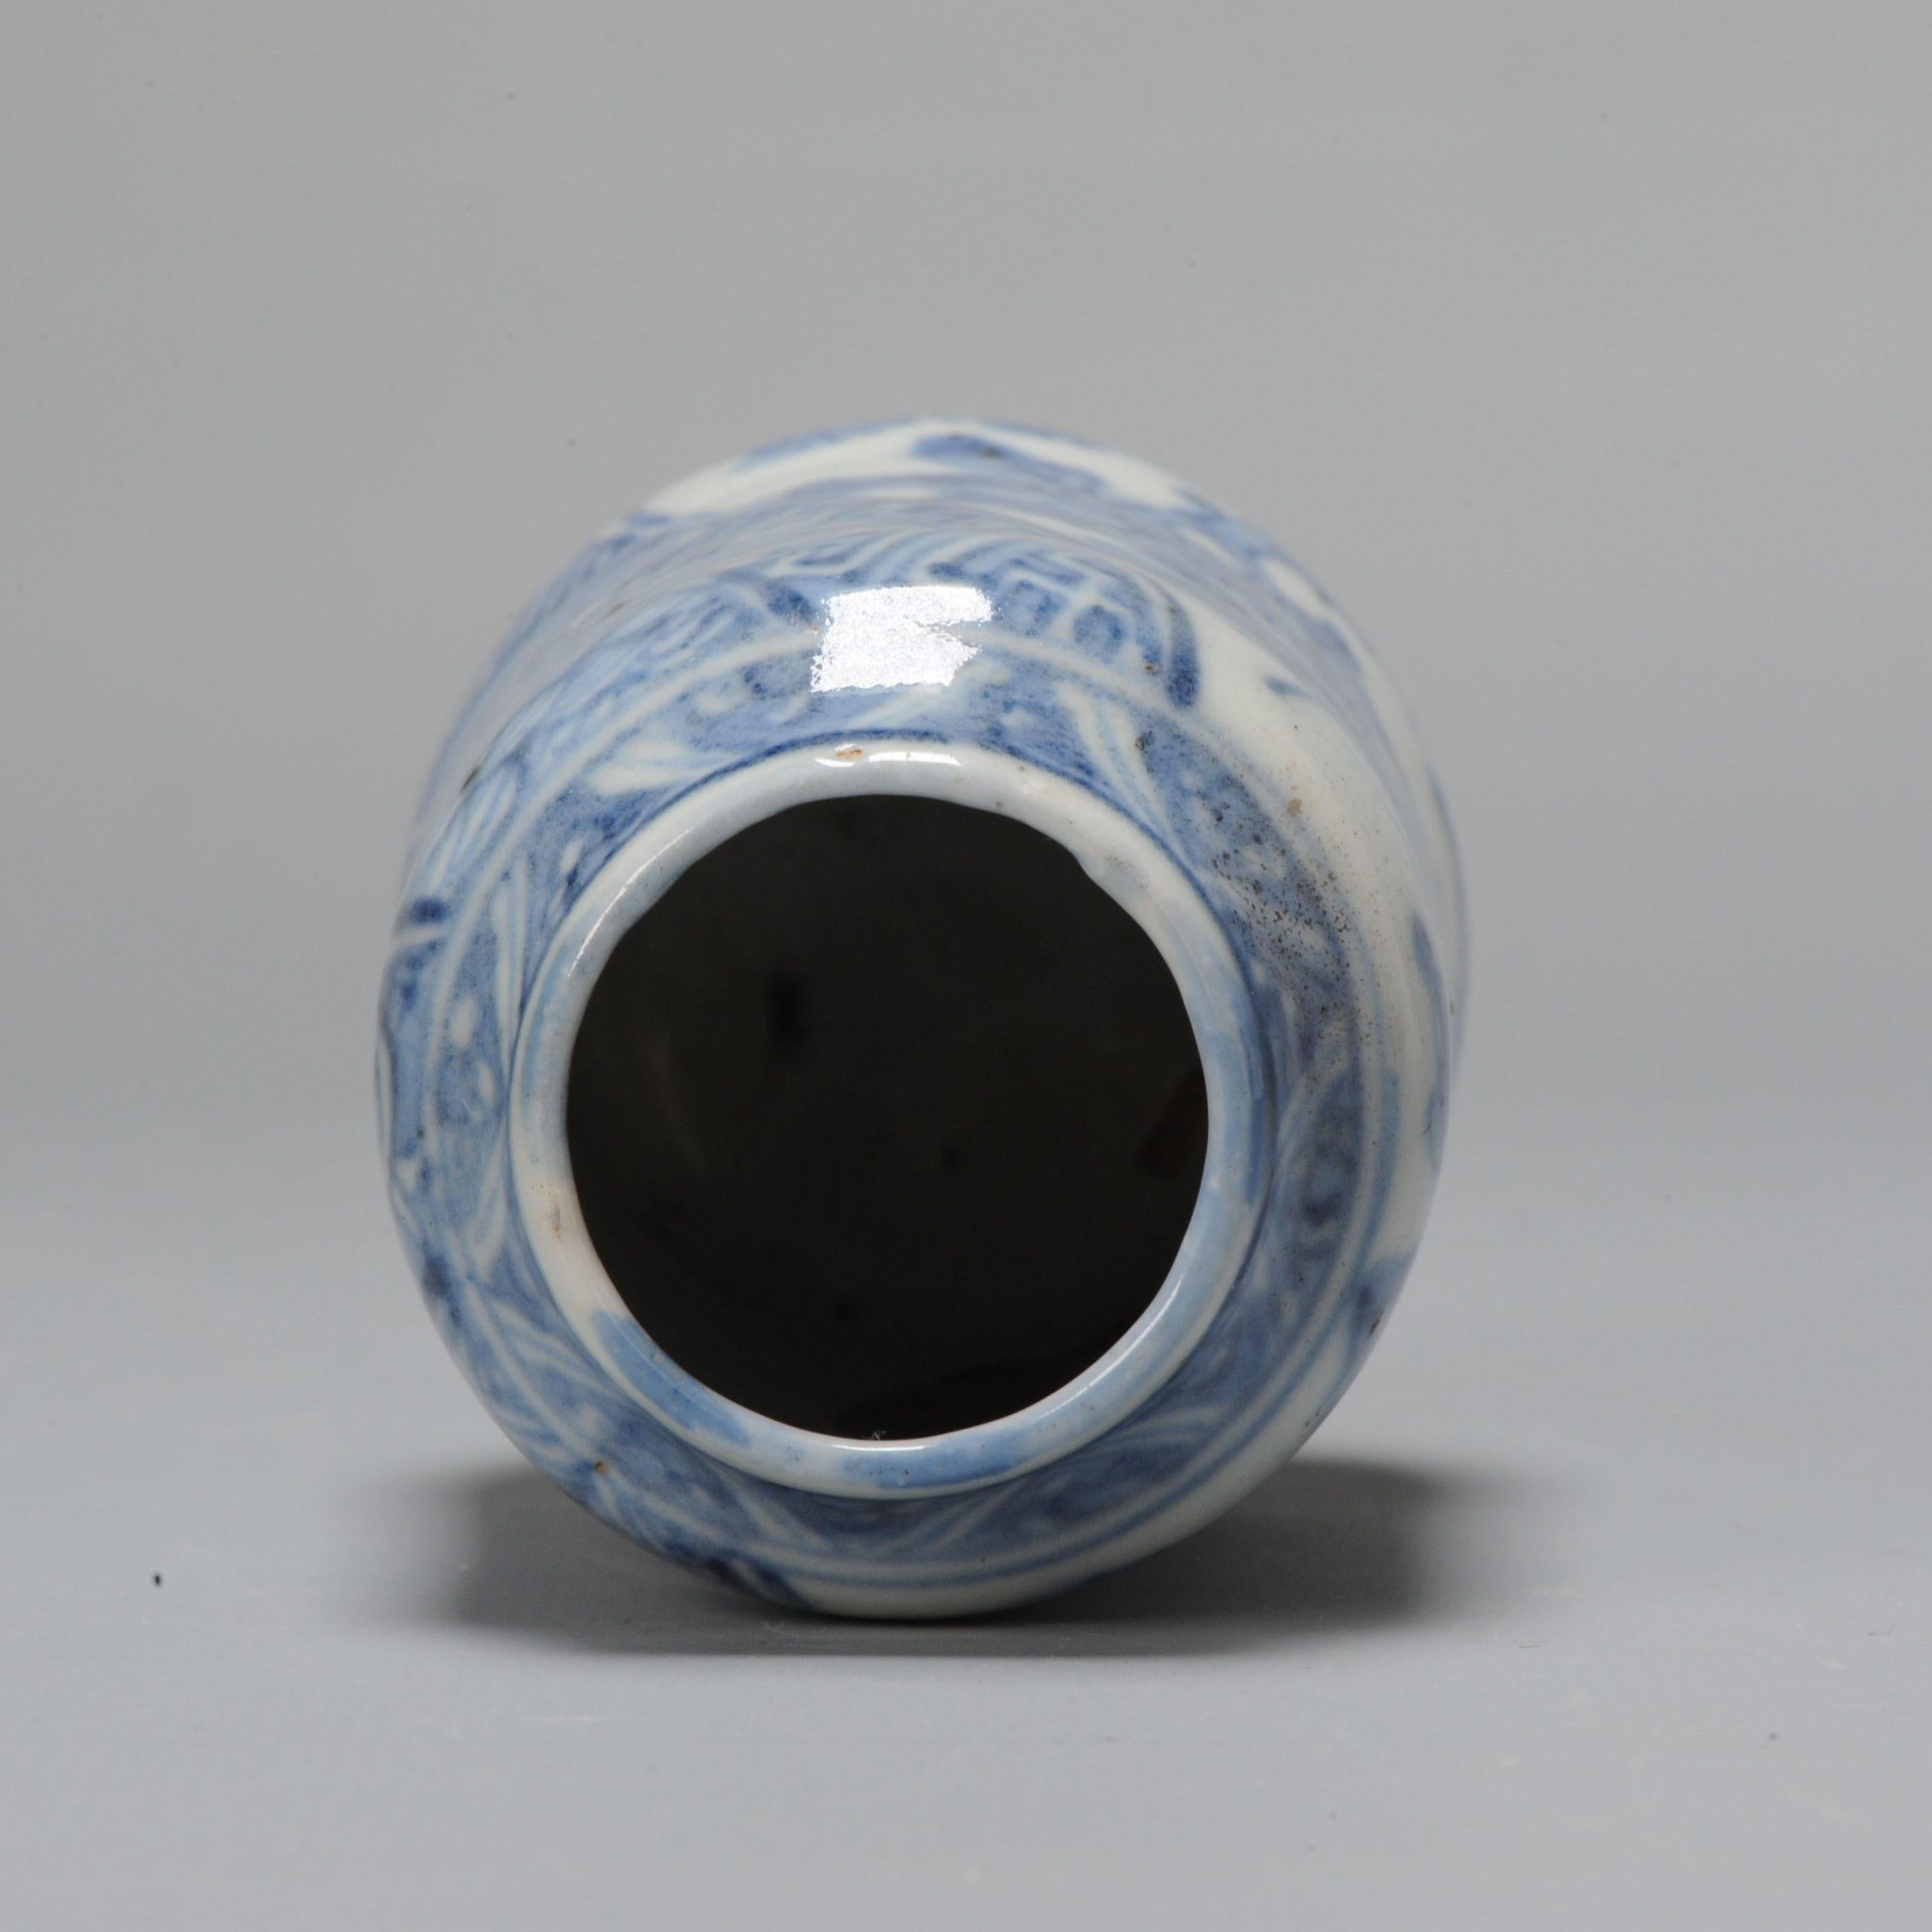 Rare Shonzui Style Japanese Porcelain Edo Period Small Tea Jar, ca 1630-1670 In Good Condition For Sale In Amsterdam, Noord Holland